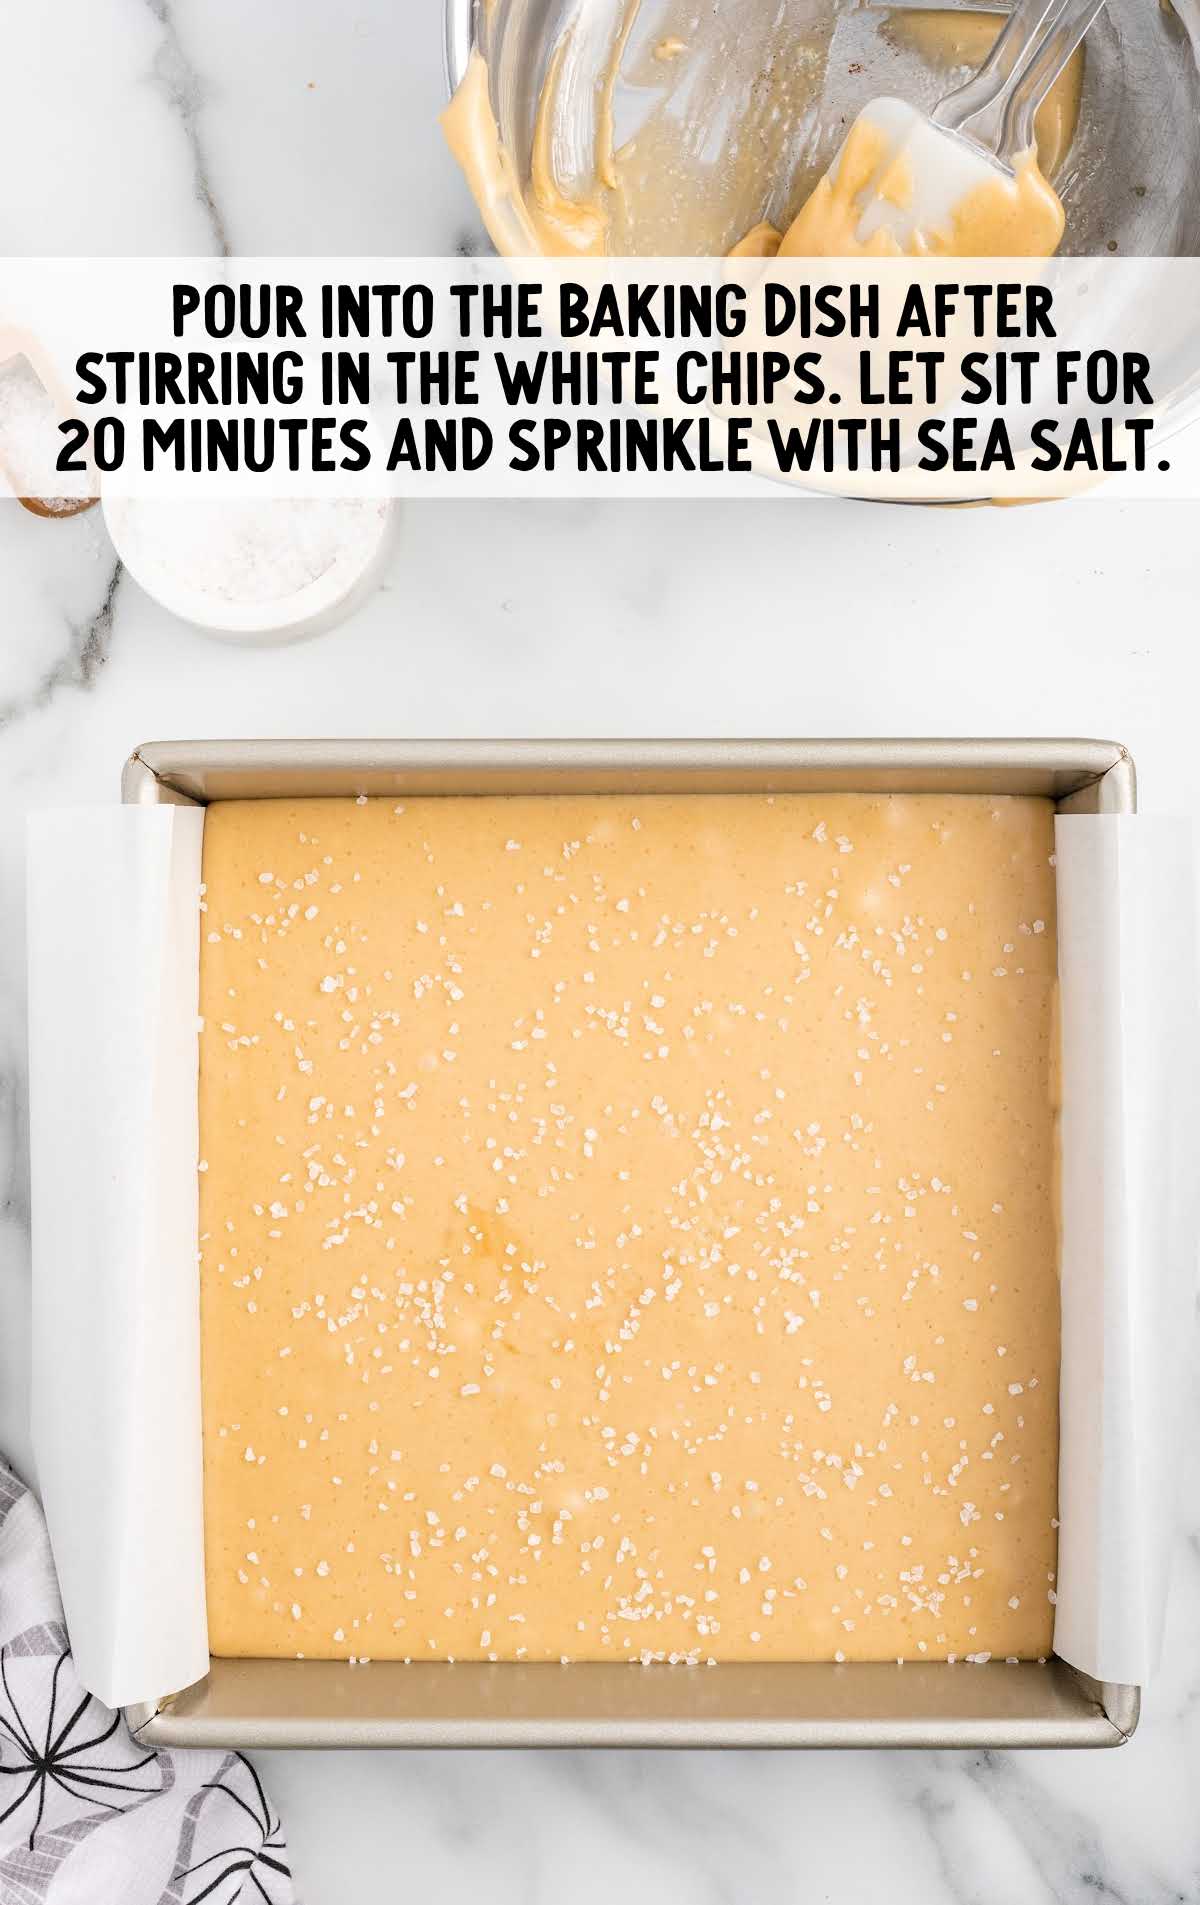 pour milk mixture into a baking dish and sprinkle sea salt after